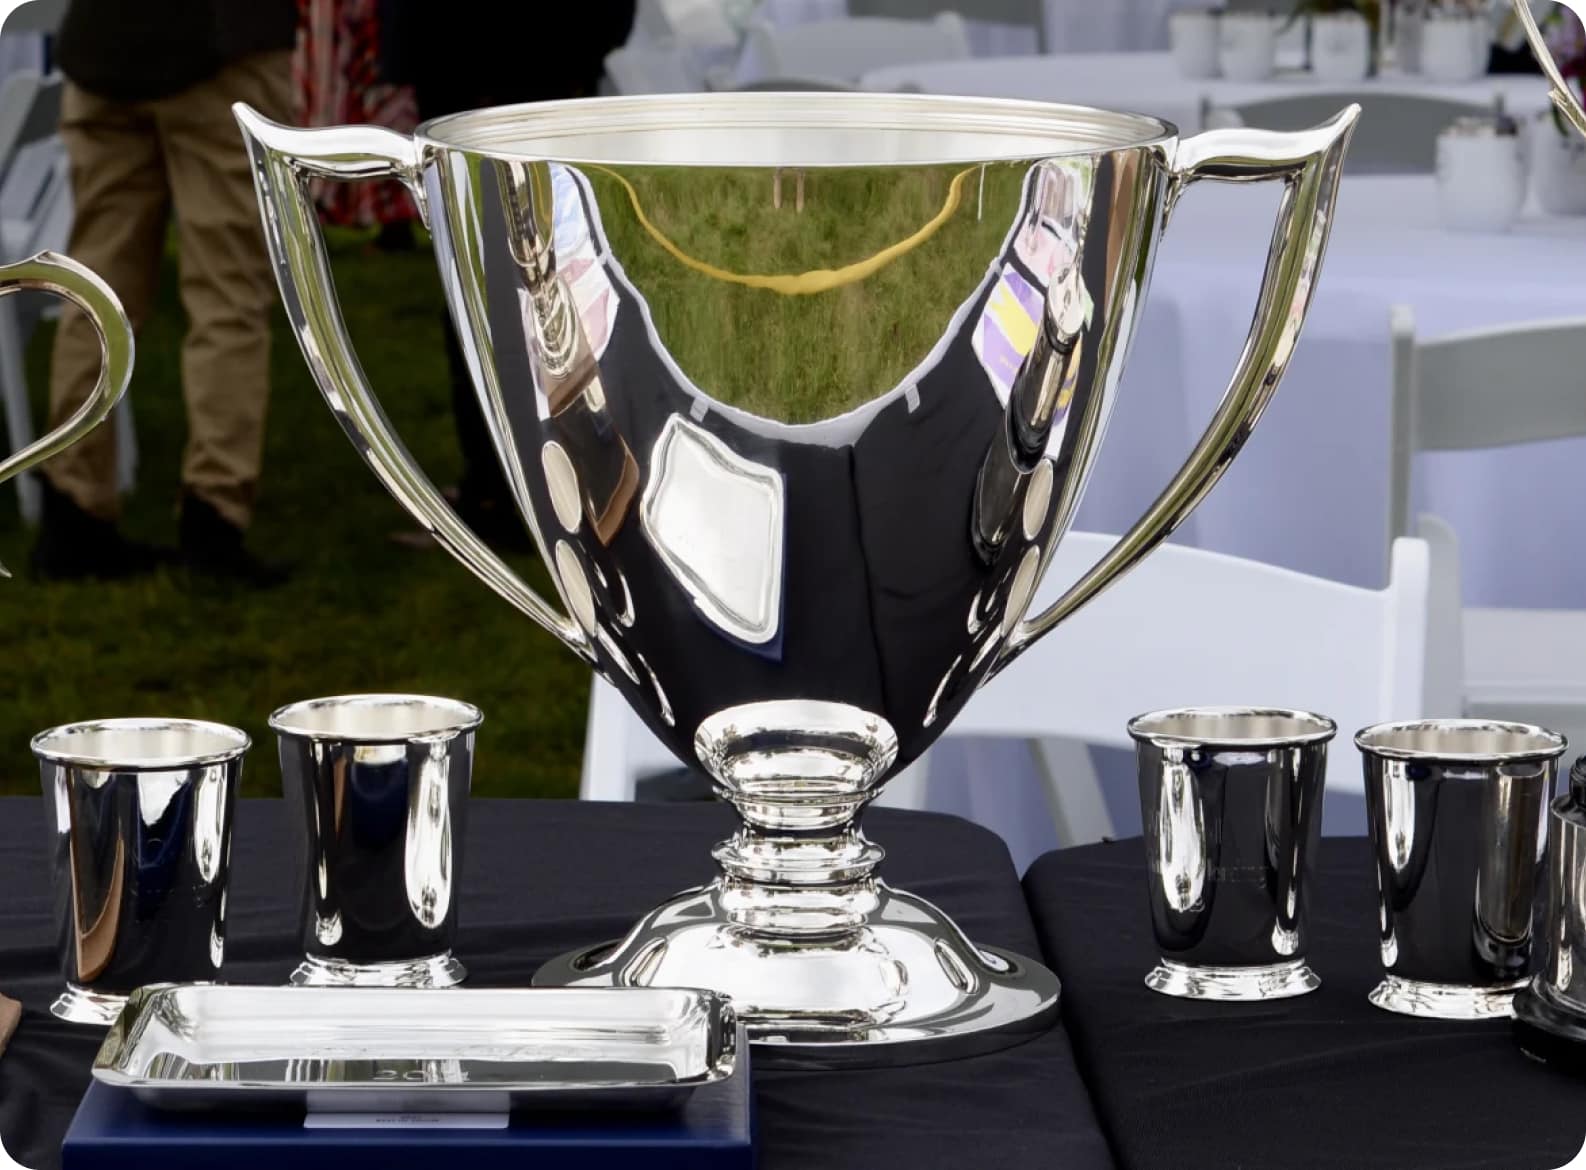 A silver trophy and silver cups on a table.